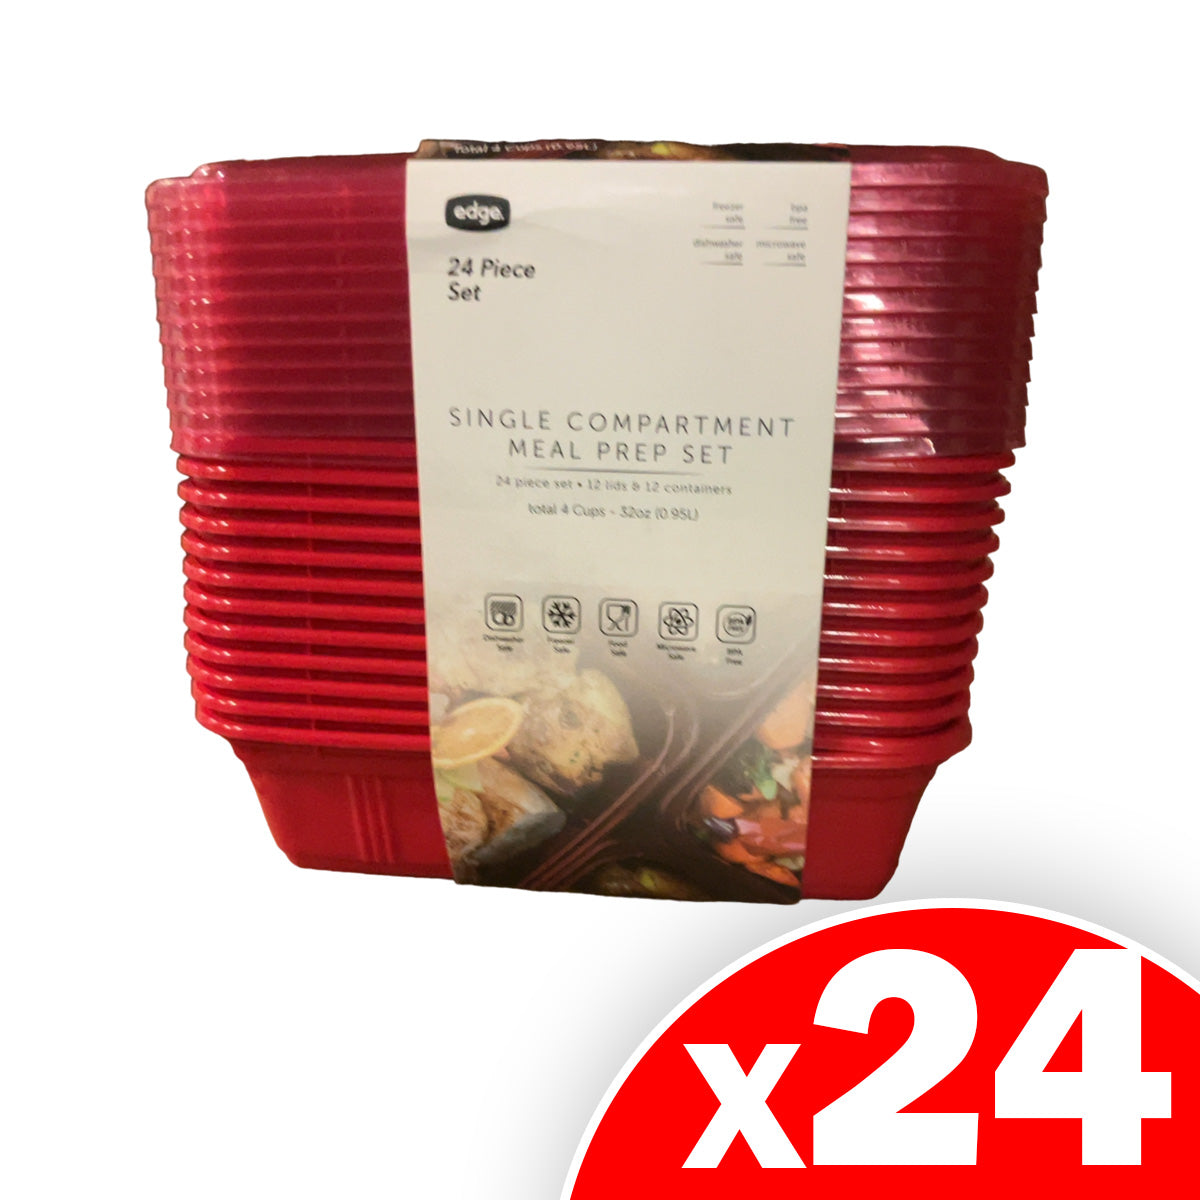 Edge 32oz Rectangle Meal Prep Containers (12 lids, 12 containers) Red, 24 Pack